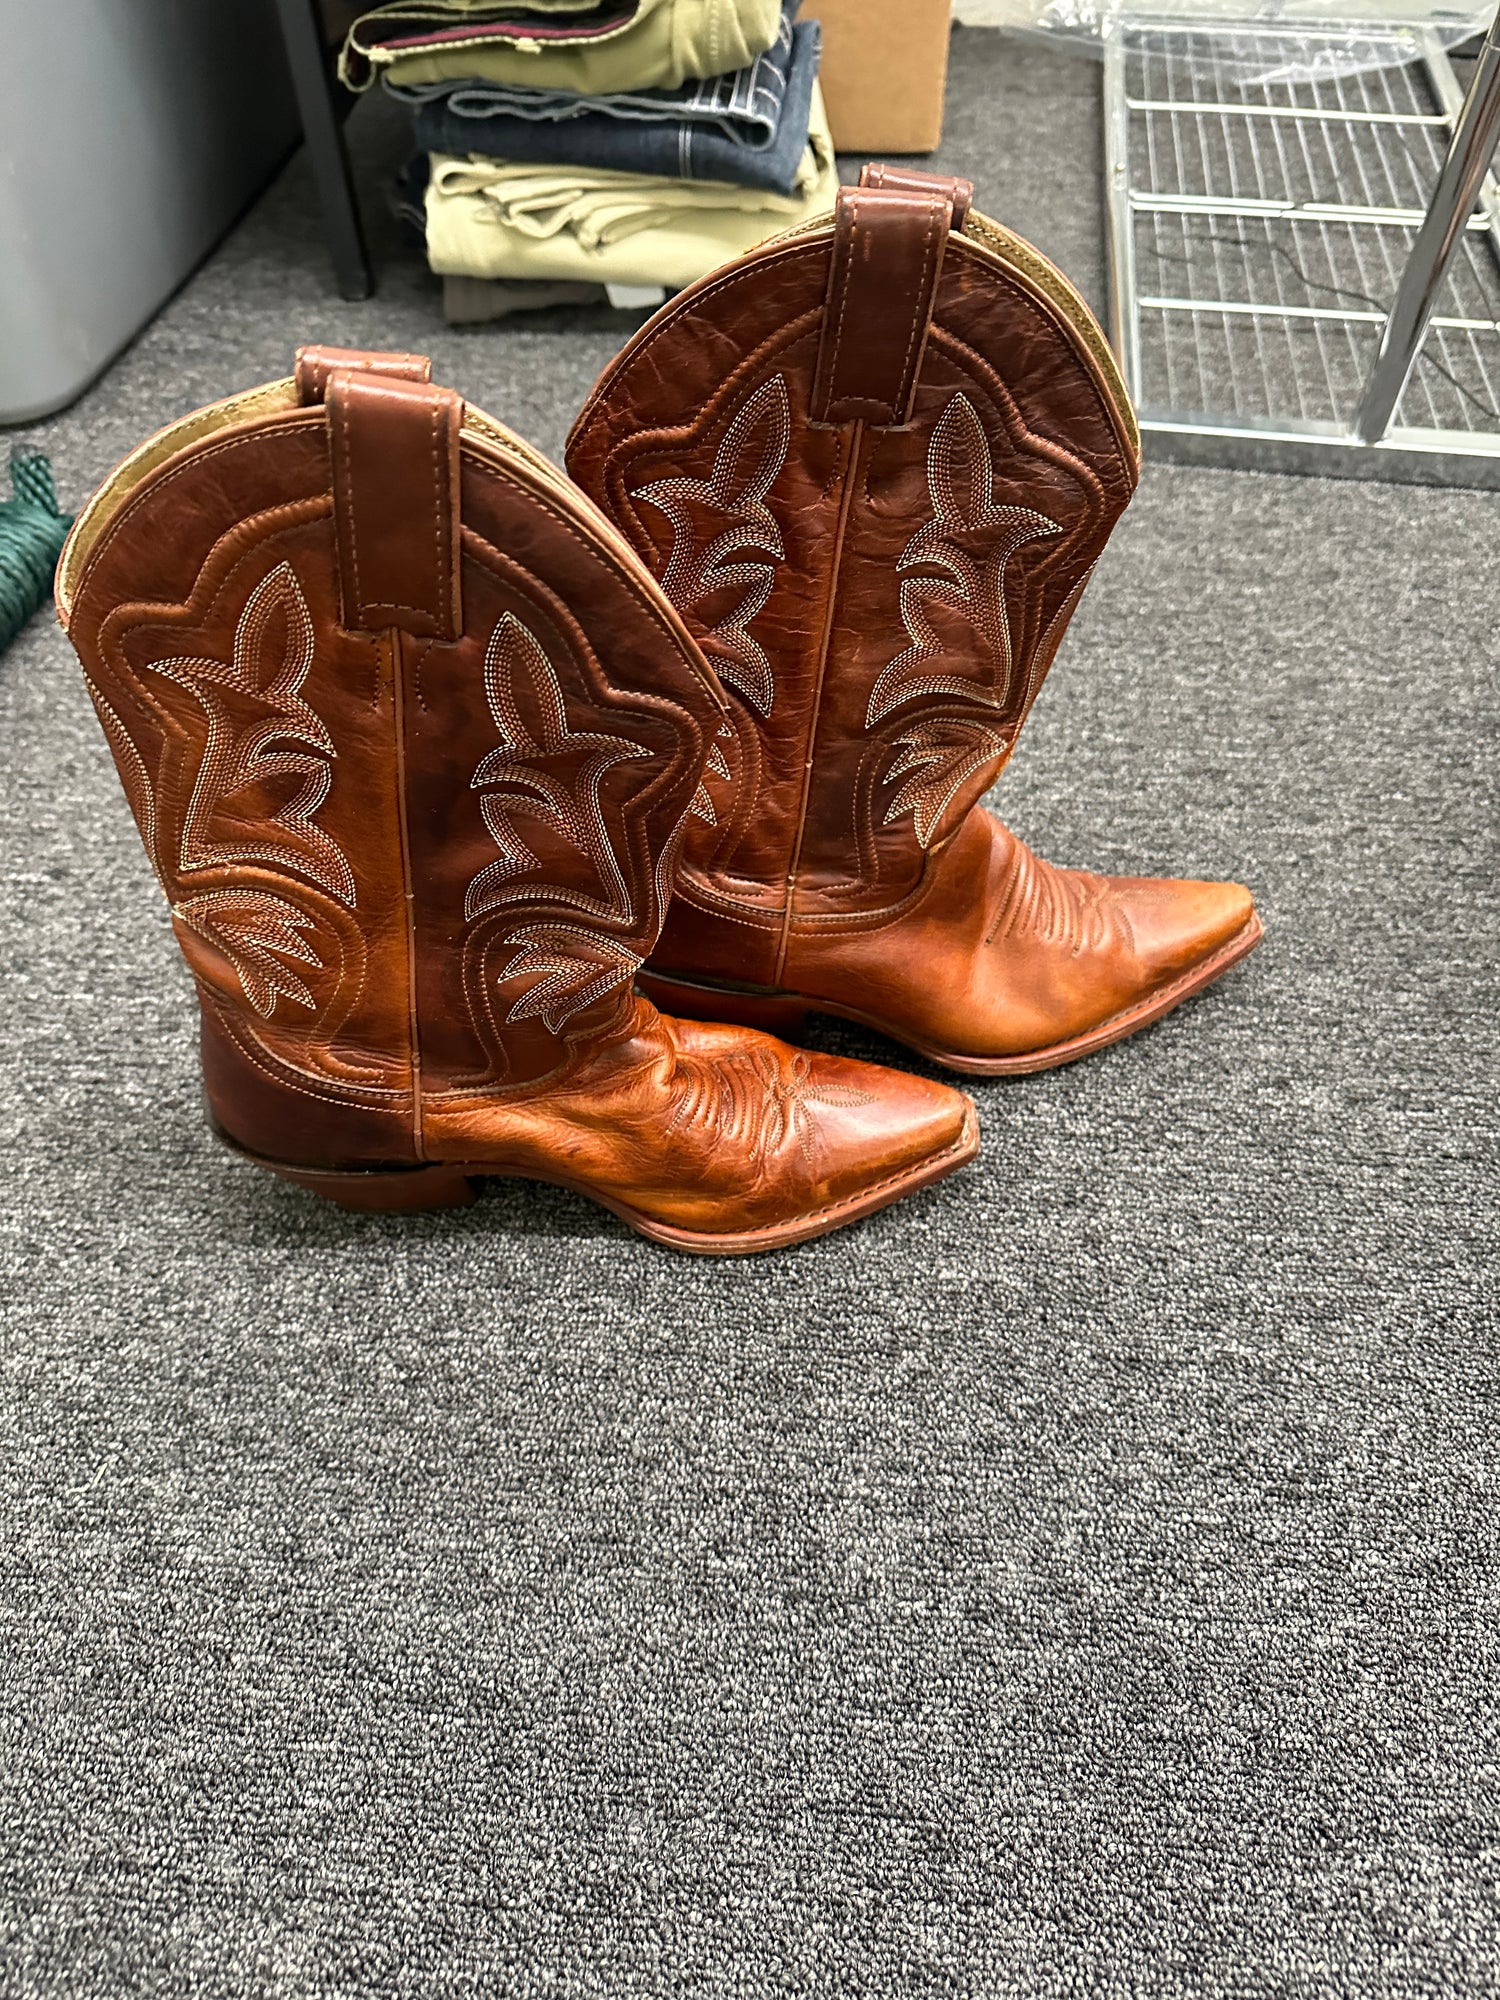 Women's Cowgirl Boots Red/Brown Size 7.5